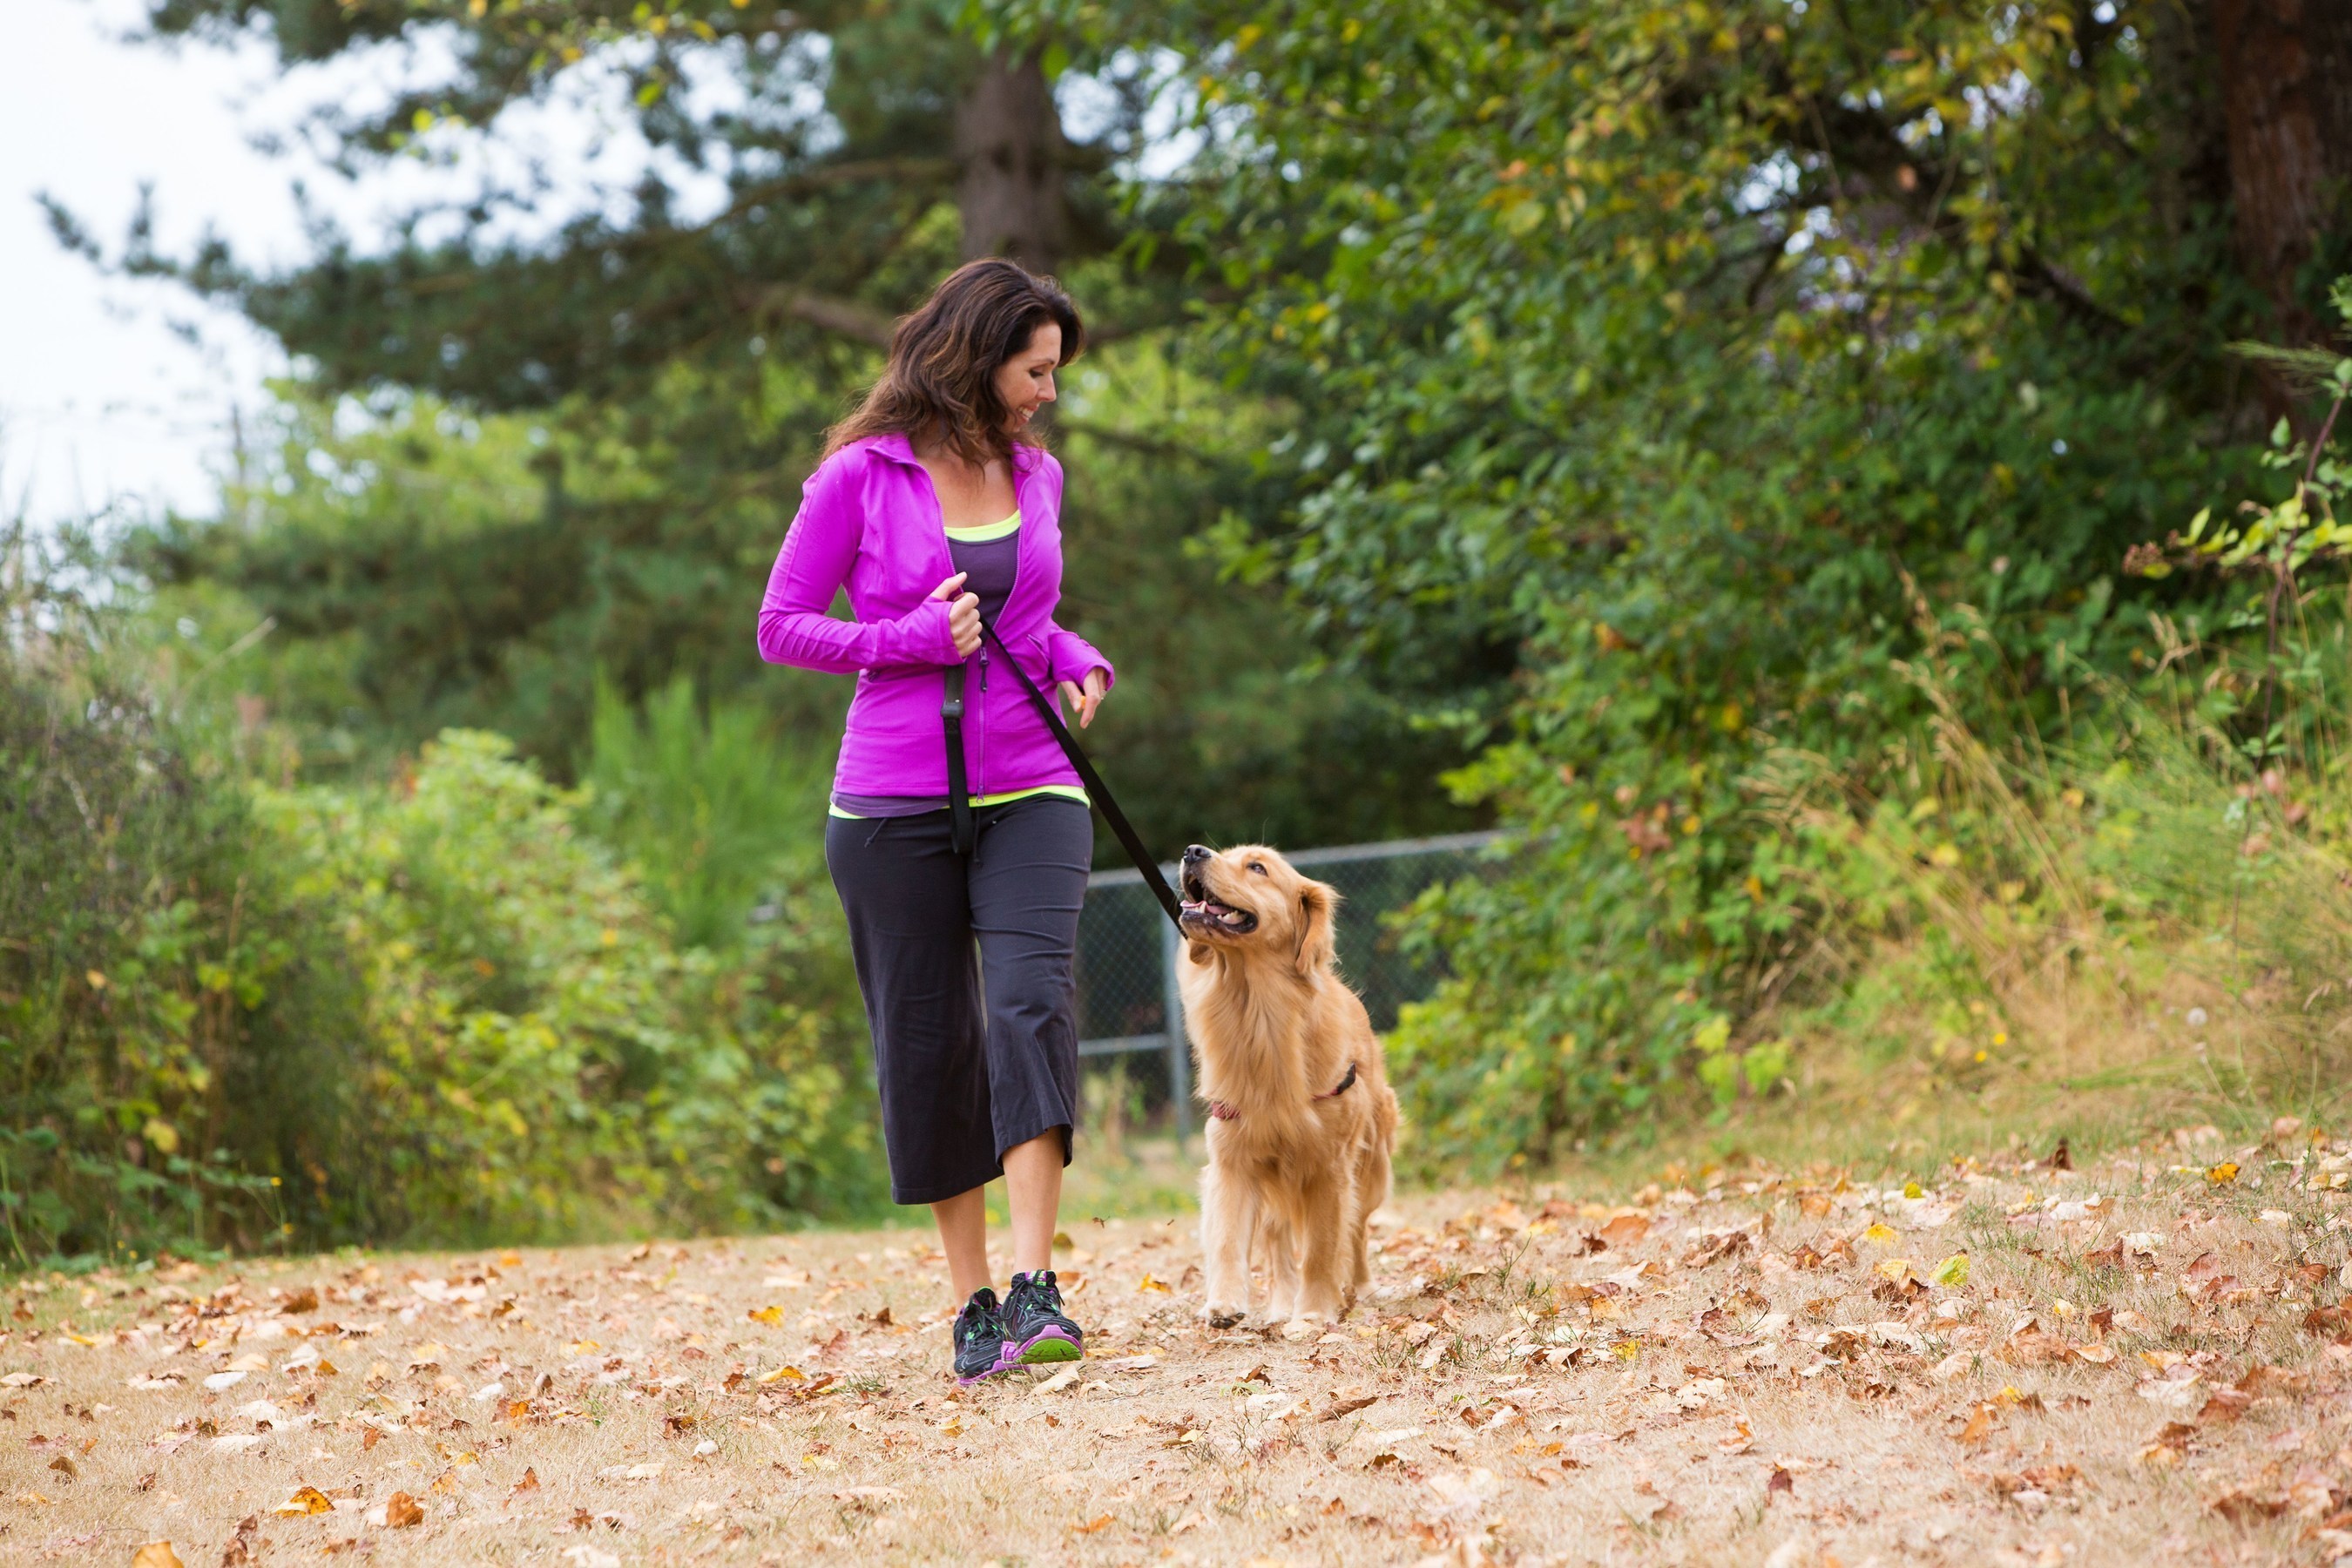 Dog walkers are more physically active than non-dog walkers. (PRNewsFoto/Mars Petcare)